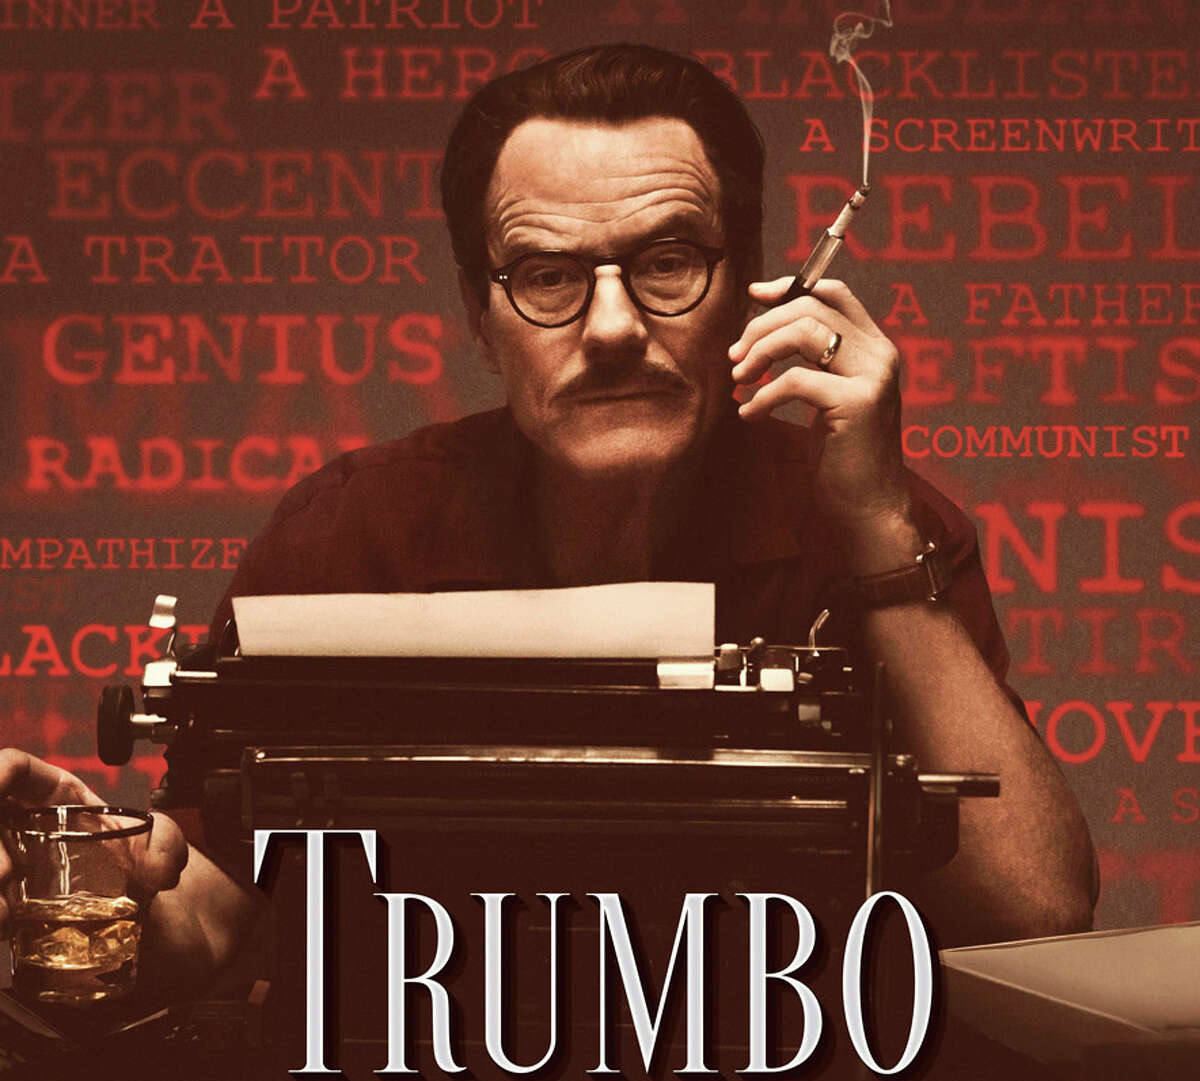 Bryan Cranston portrays the movie screenwriter Dalton Trumbo, who was blacklisted during the Red Scare era, in the new movie, "Trumbo."